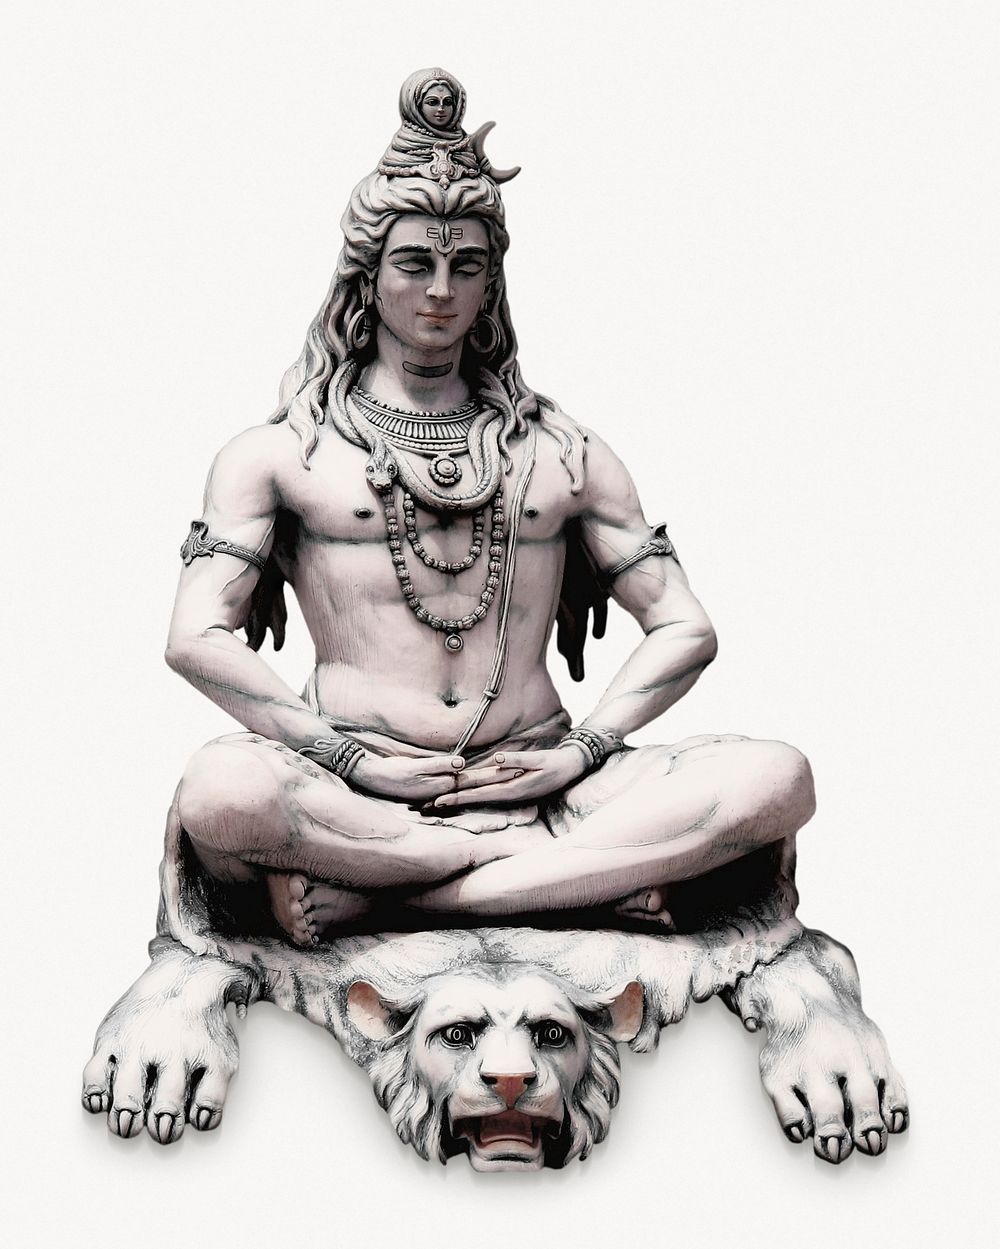 300+] Lord Shiva Pictures | Wallpapers.com